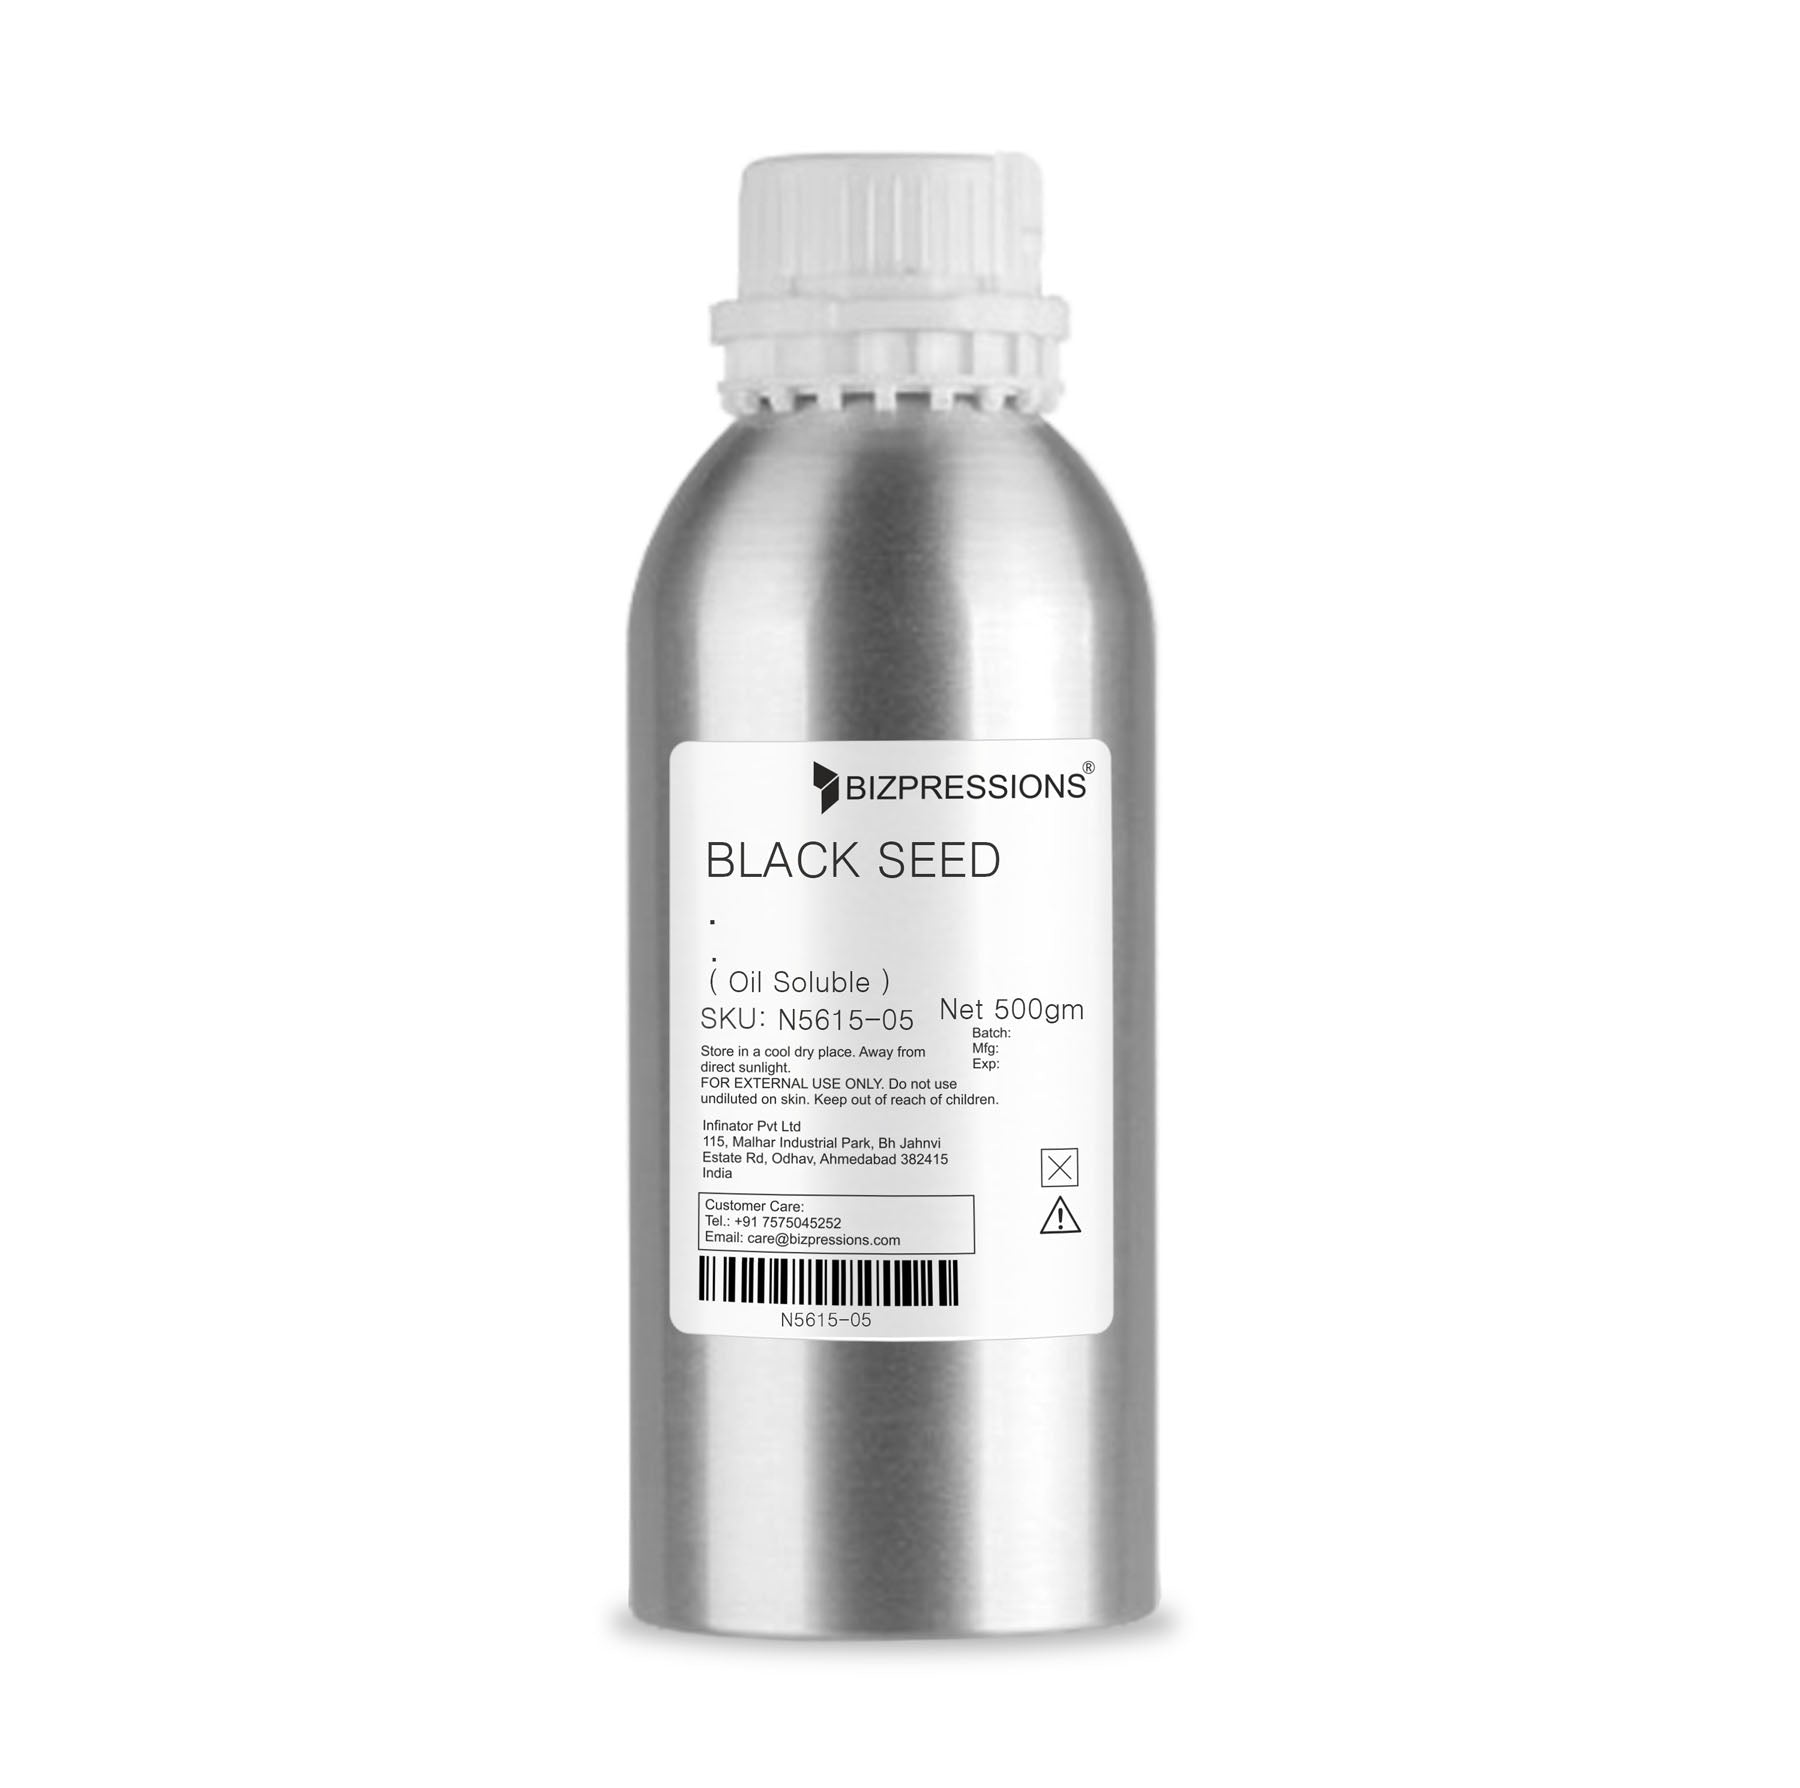 BLACK SEED - Fragrance ( Oil Soluble ) - 500 gm